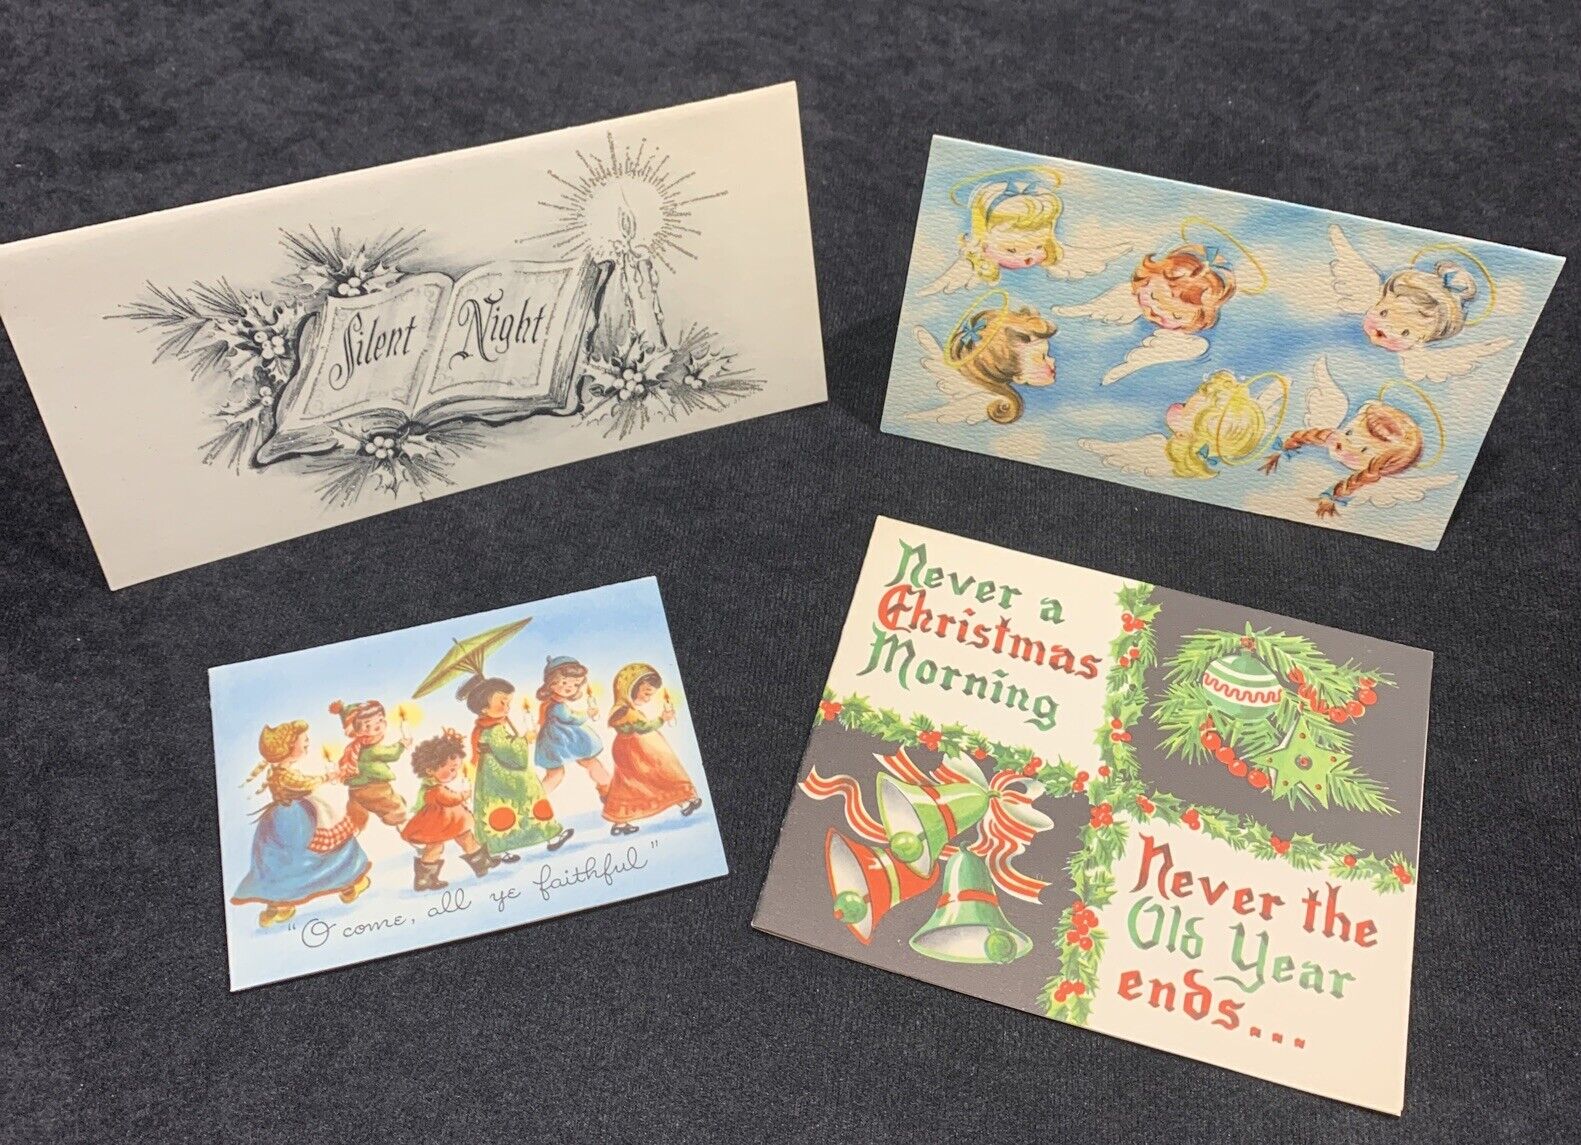 Lot Of 4 1940's Vintage SUNSHINE Christmas Greeting Cards. Very Good Condition